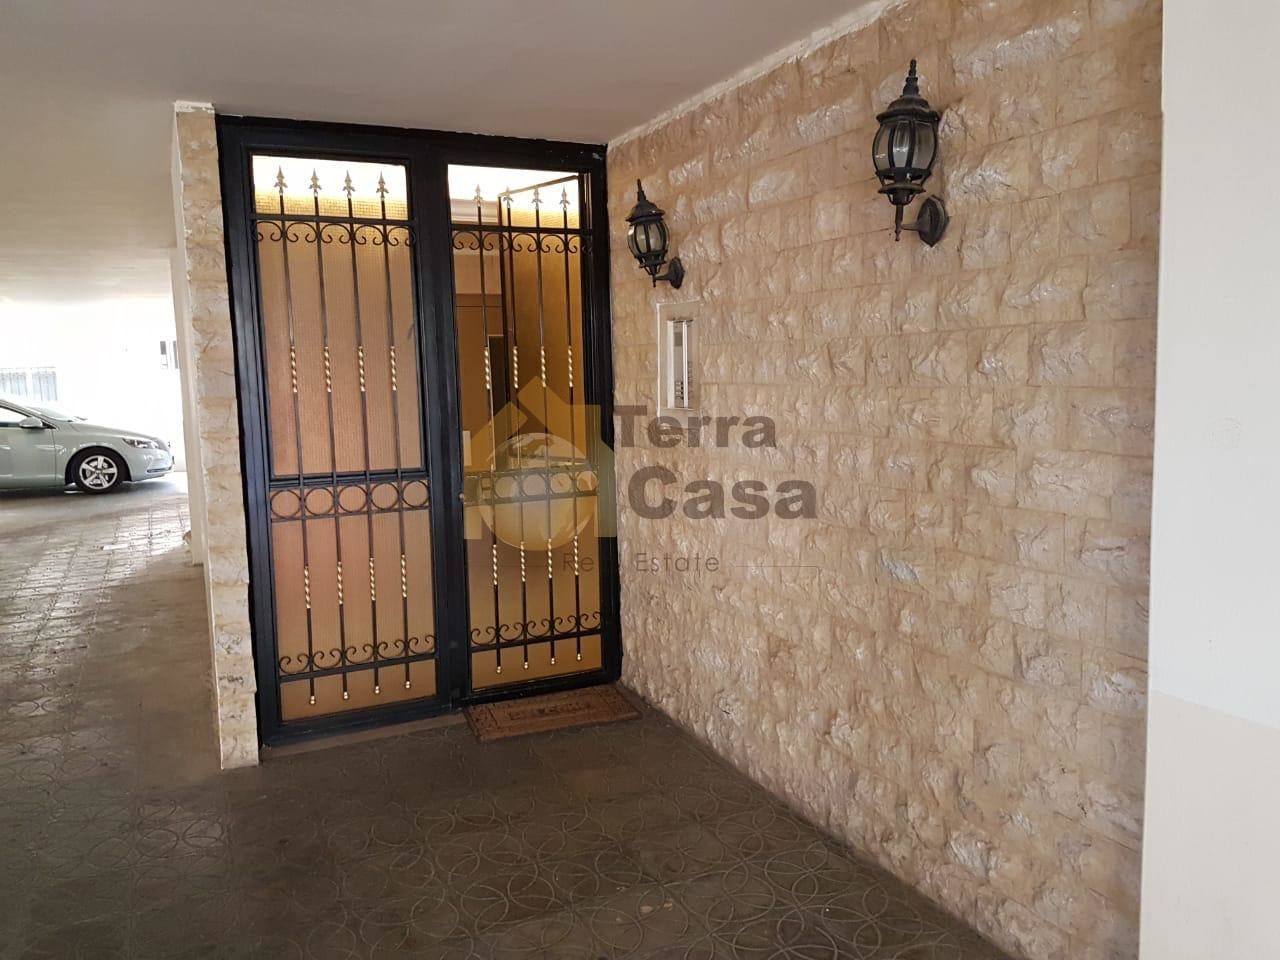 Apartment for sale in ain saade one unit per floor fully decorated with terrace and small garden.